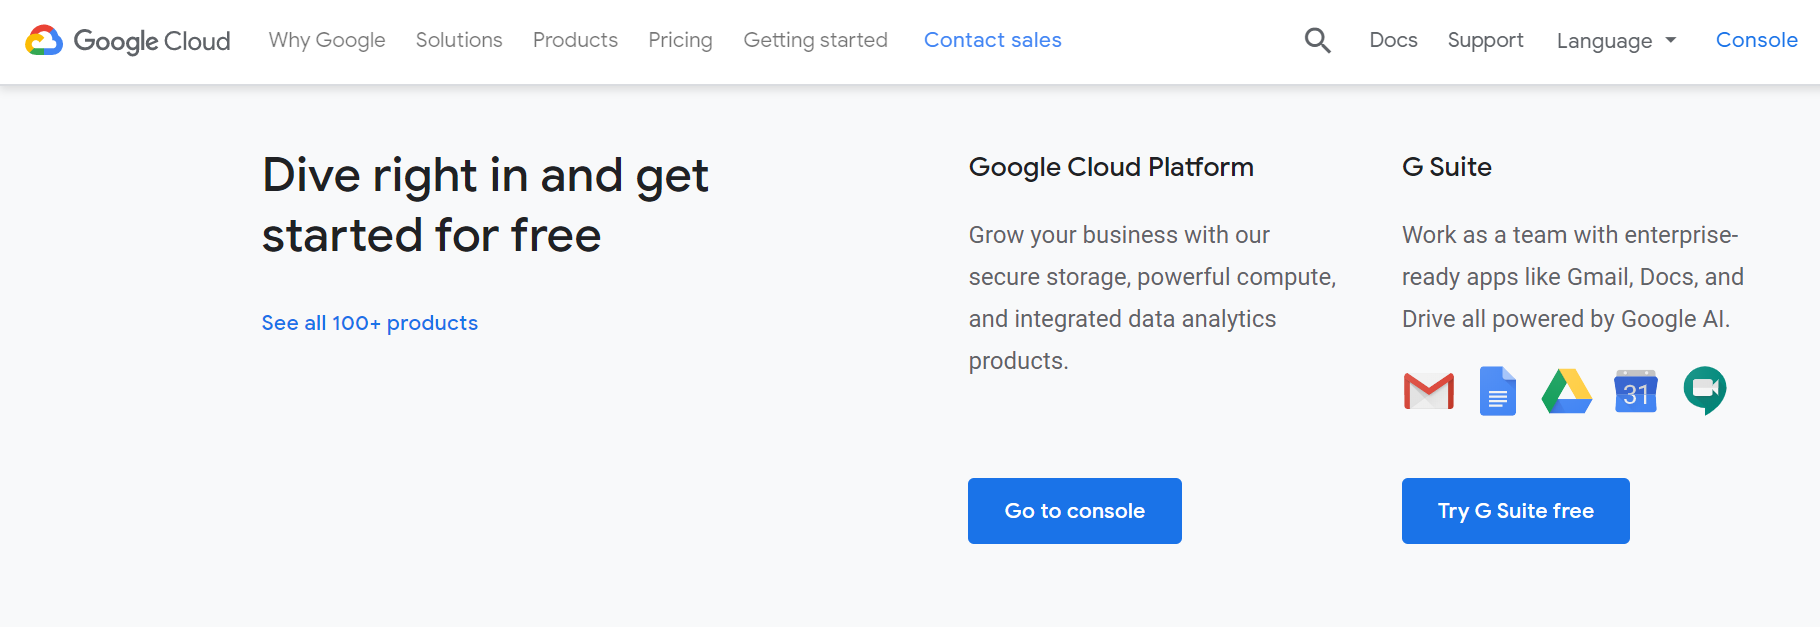 Why Google Cloud has Acquired the Cloud Computing scenario?